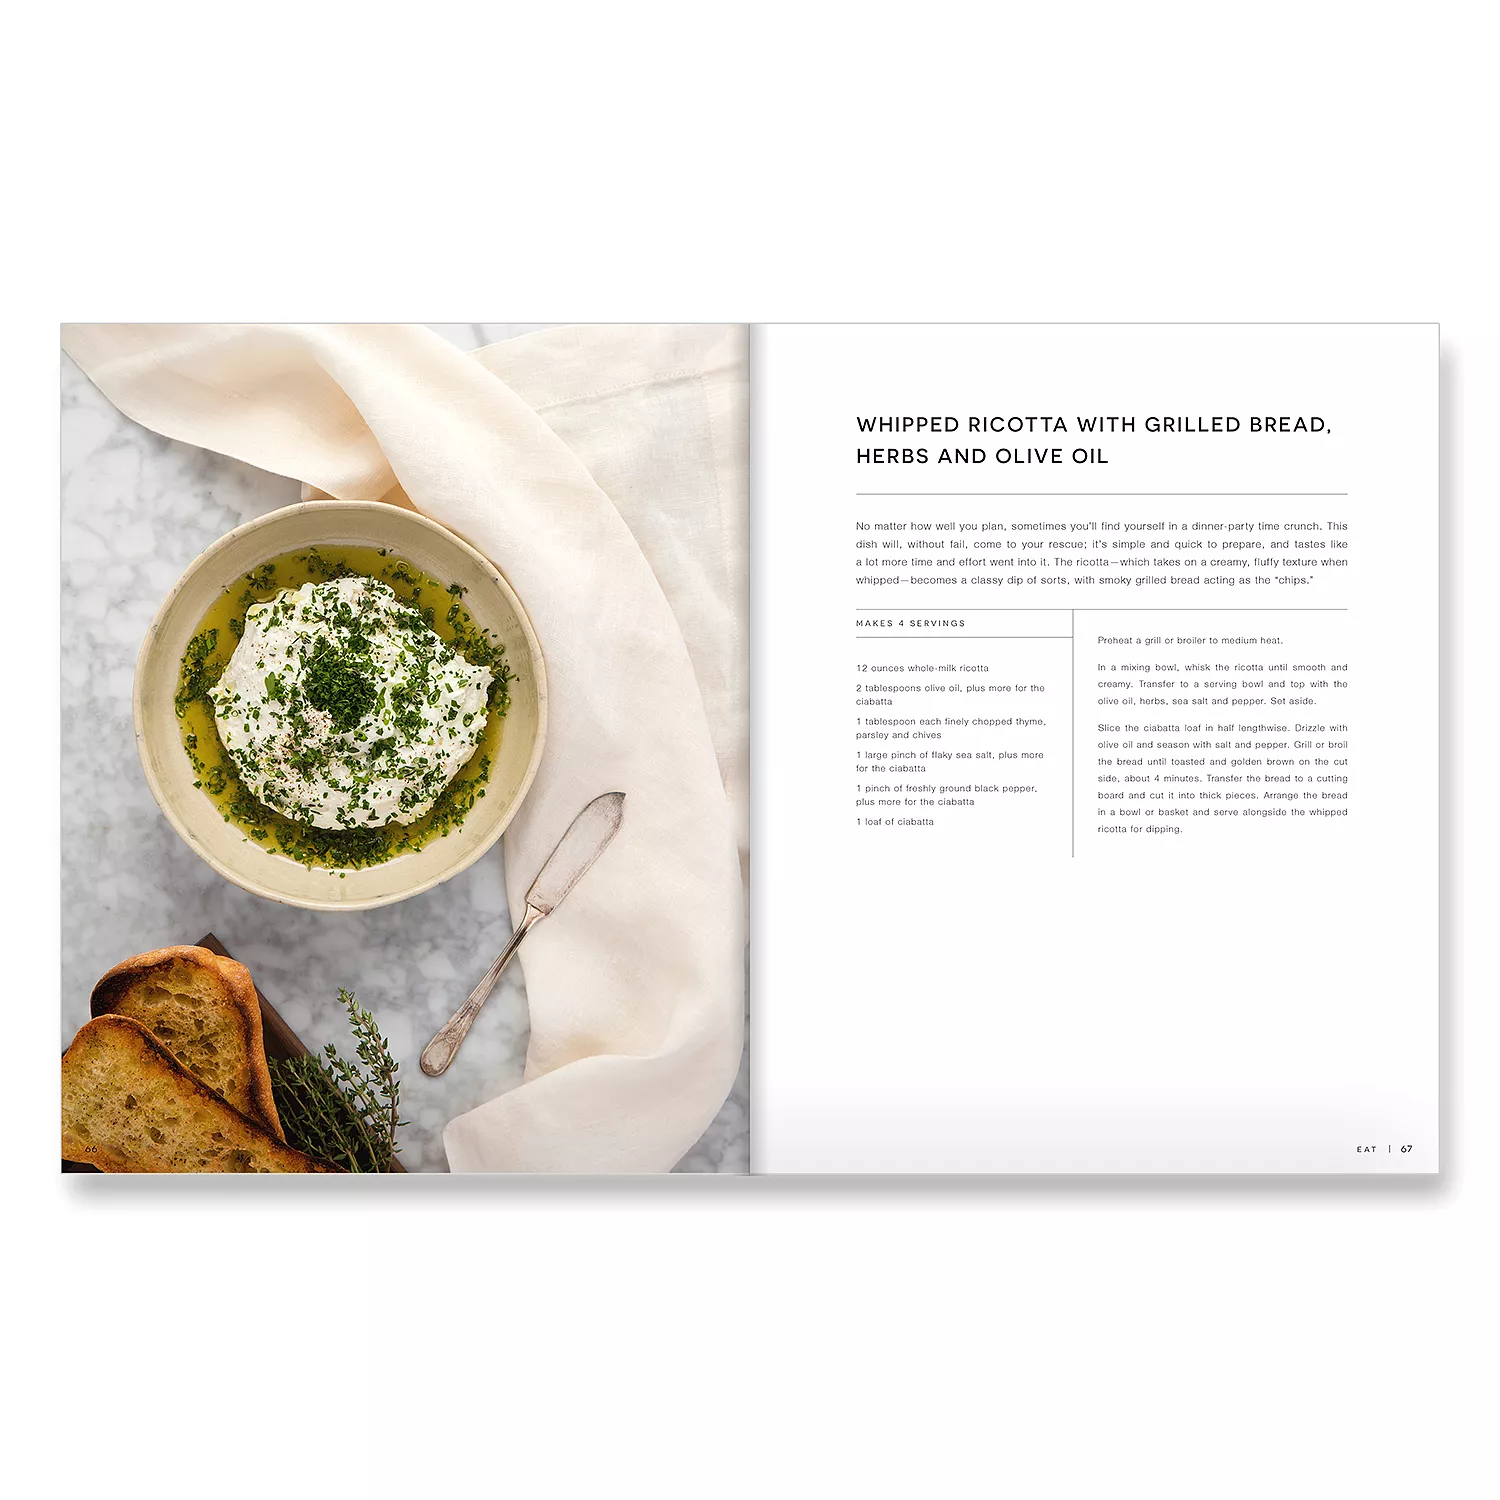 Sur La Table Host: A Modern Guide to Eating, Drinking, and Feeding Your Friends